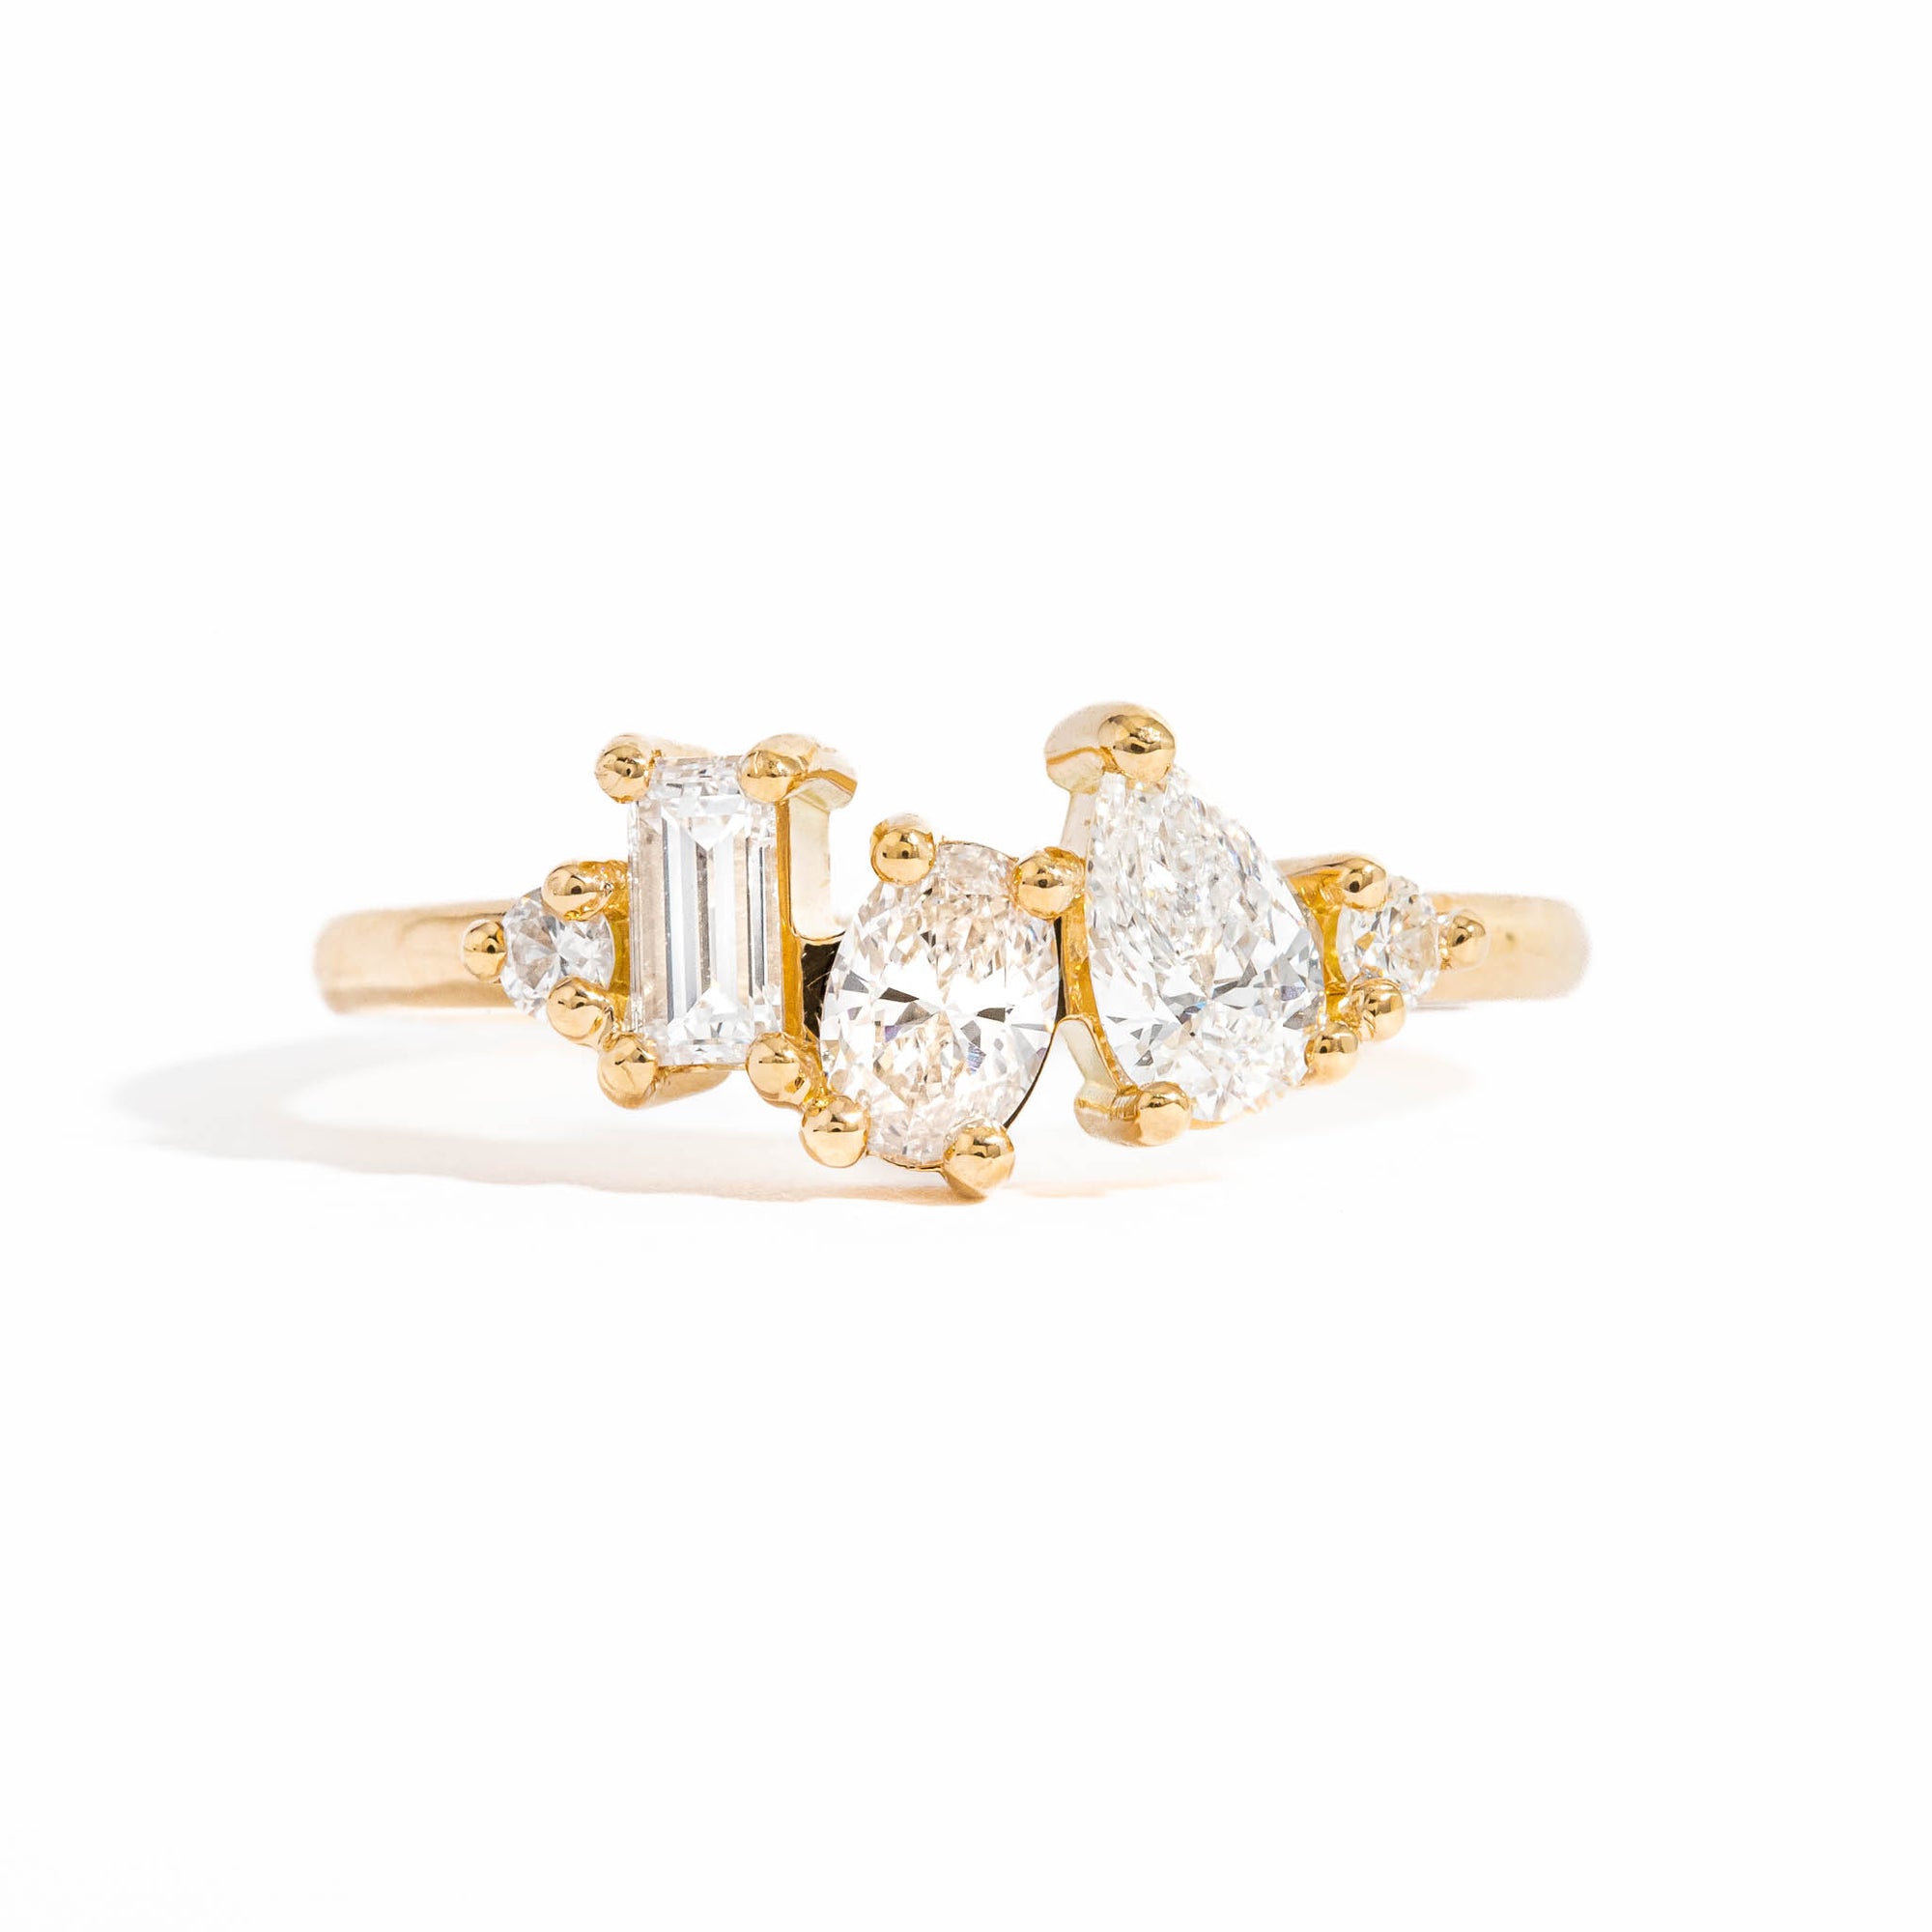  Five Stone Pear Cut, Pear Cut and Oval Cut and Baguette Cut Diamond Engagement Ring in 18 Carat Yellow Gold